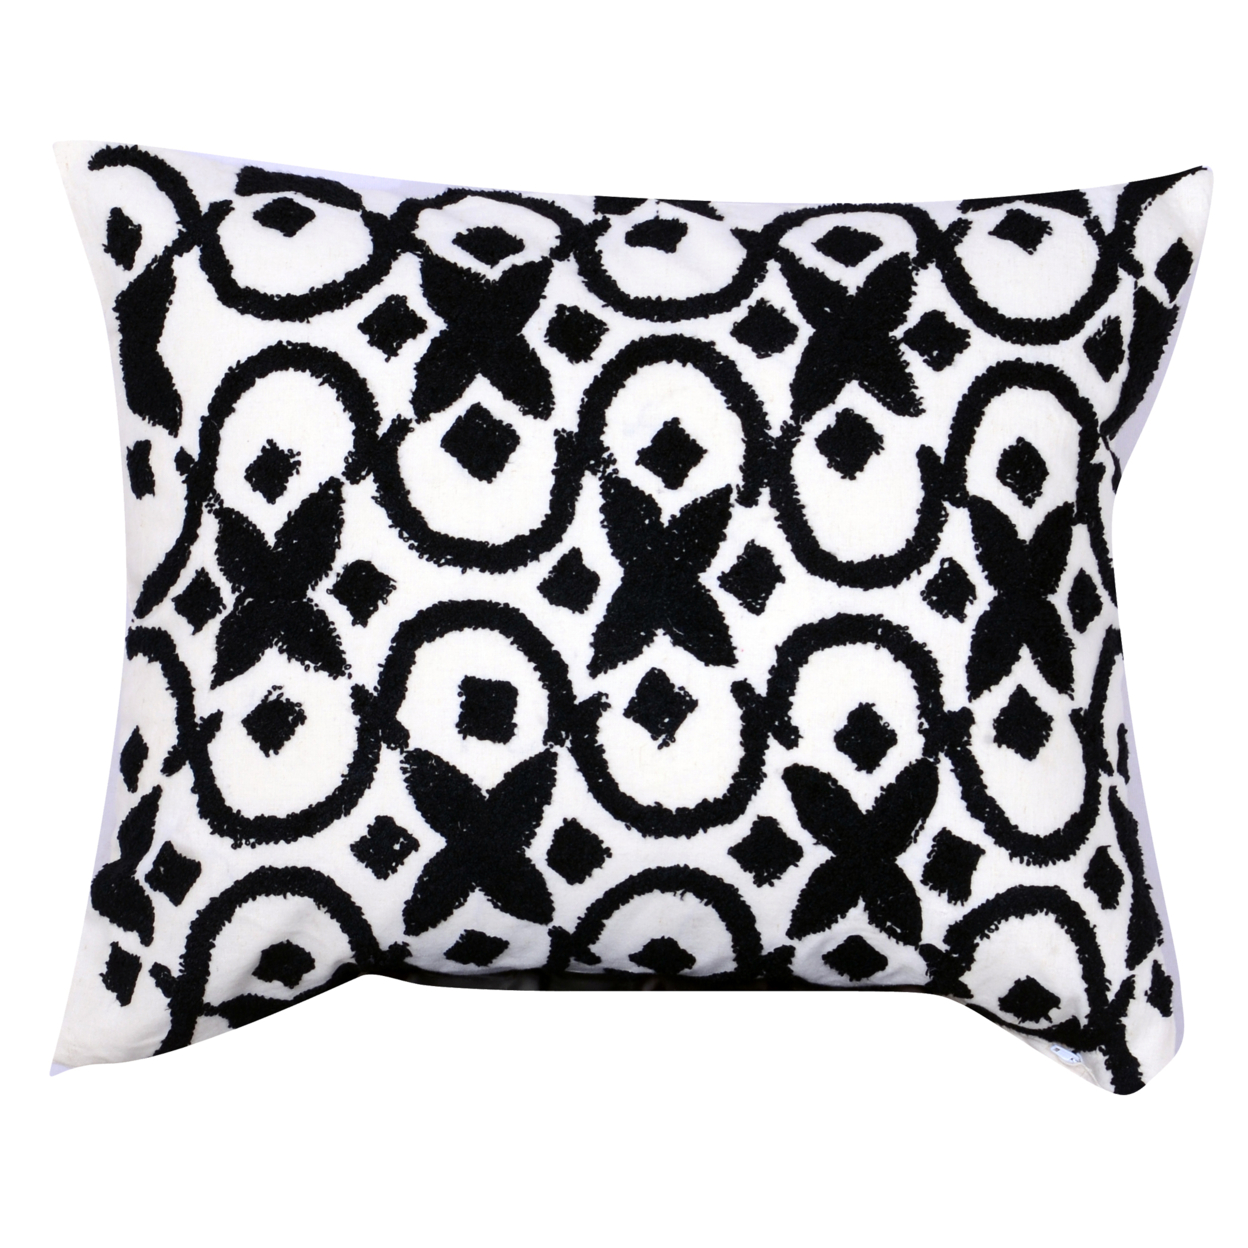 20 X 16 Inch Cotton Pillow With Geometric Embroidery, Set Of 2, White And Black- Saltoro Sherpi